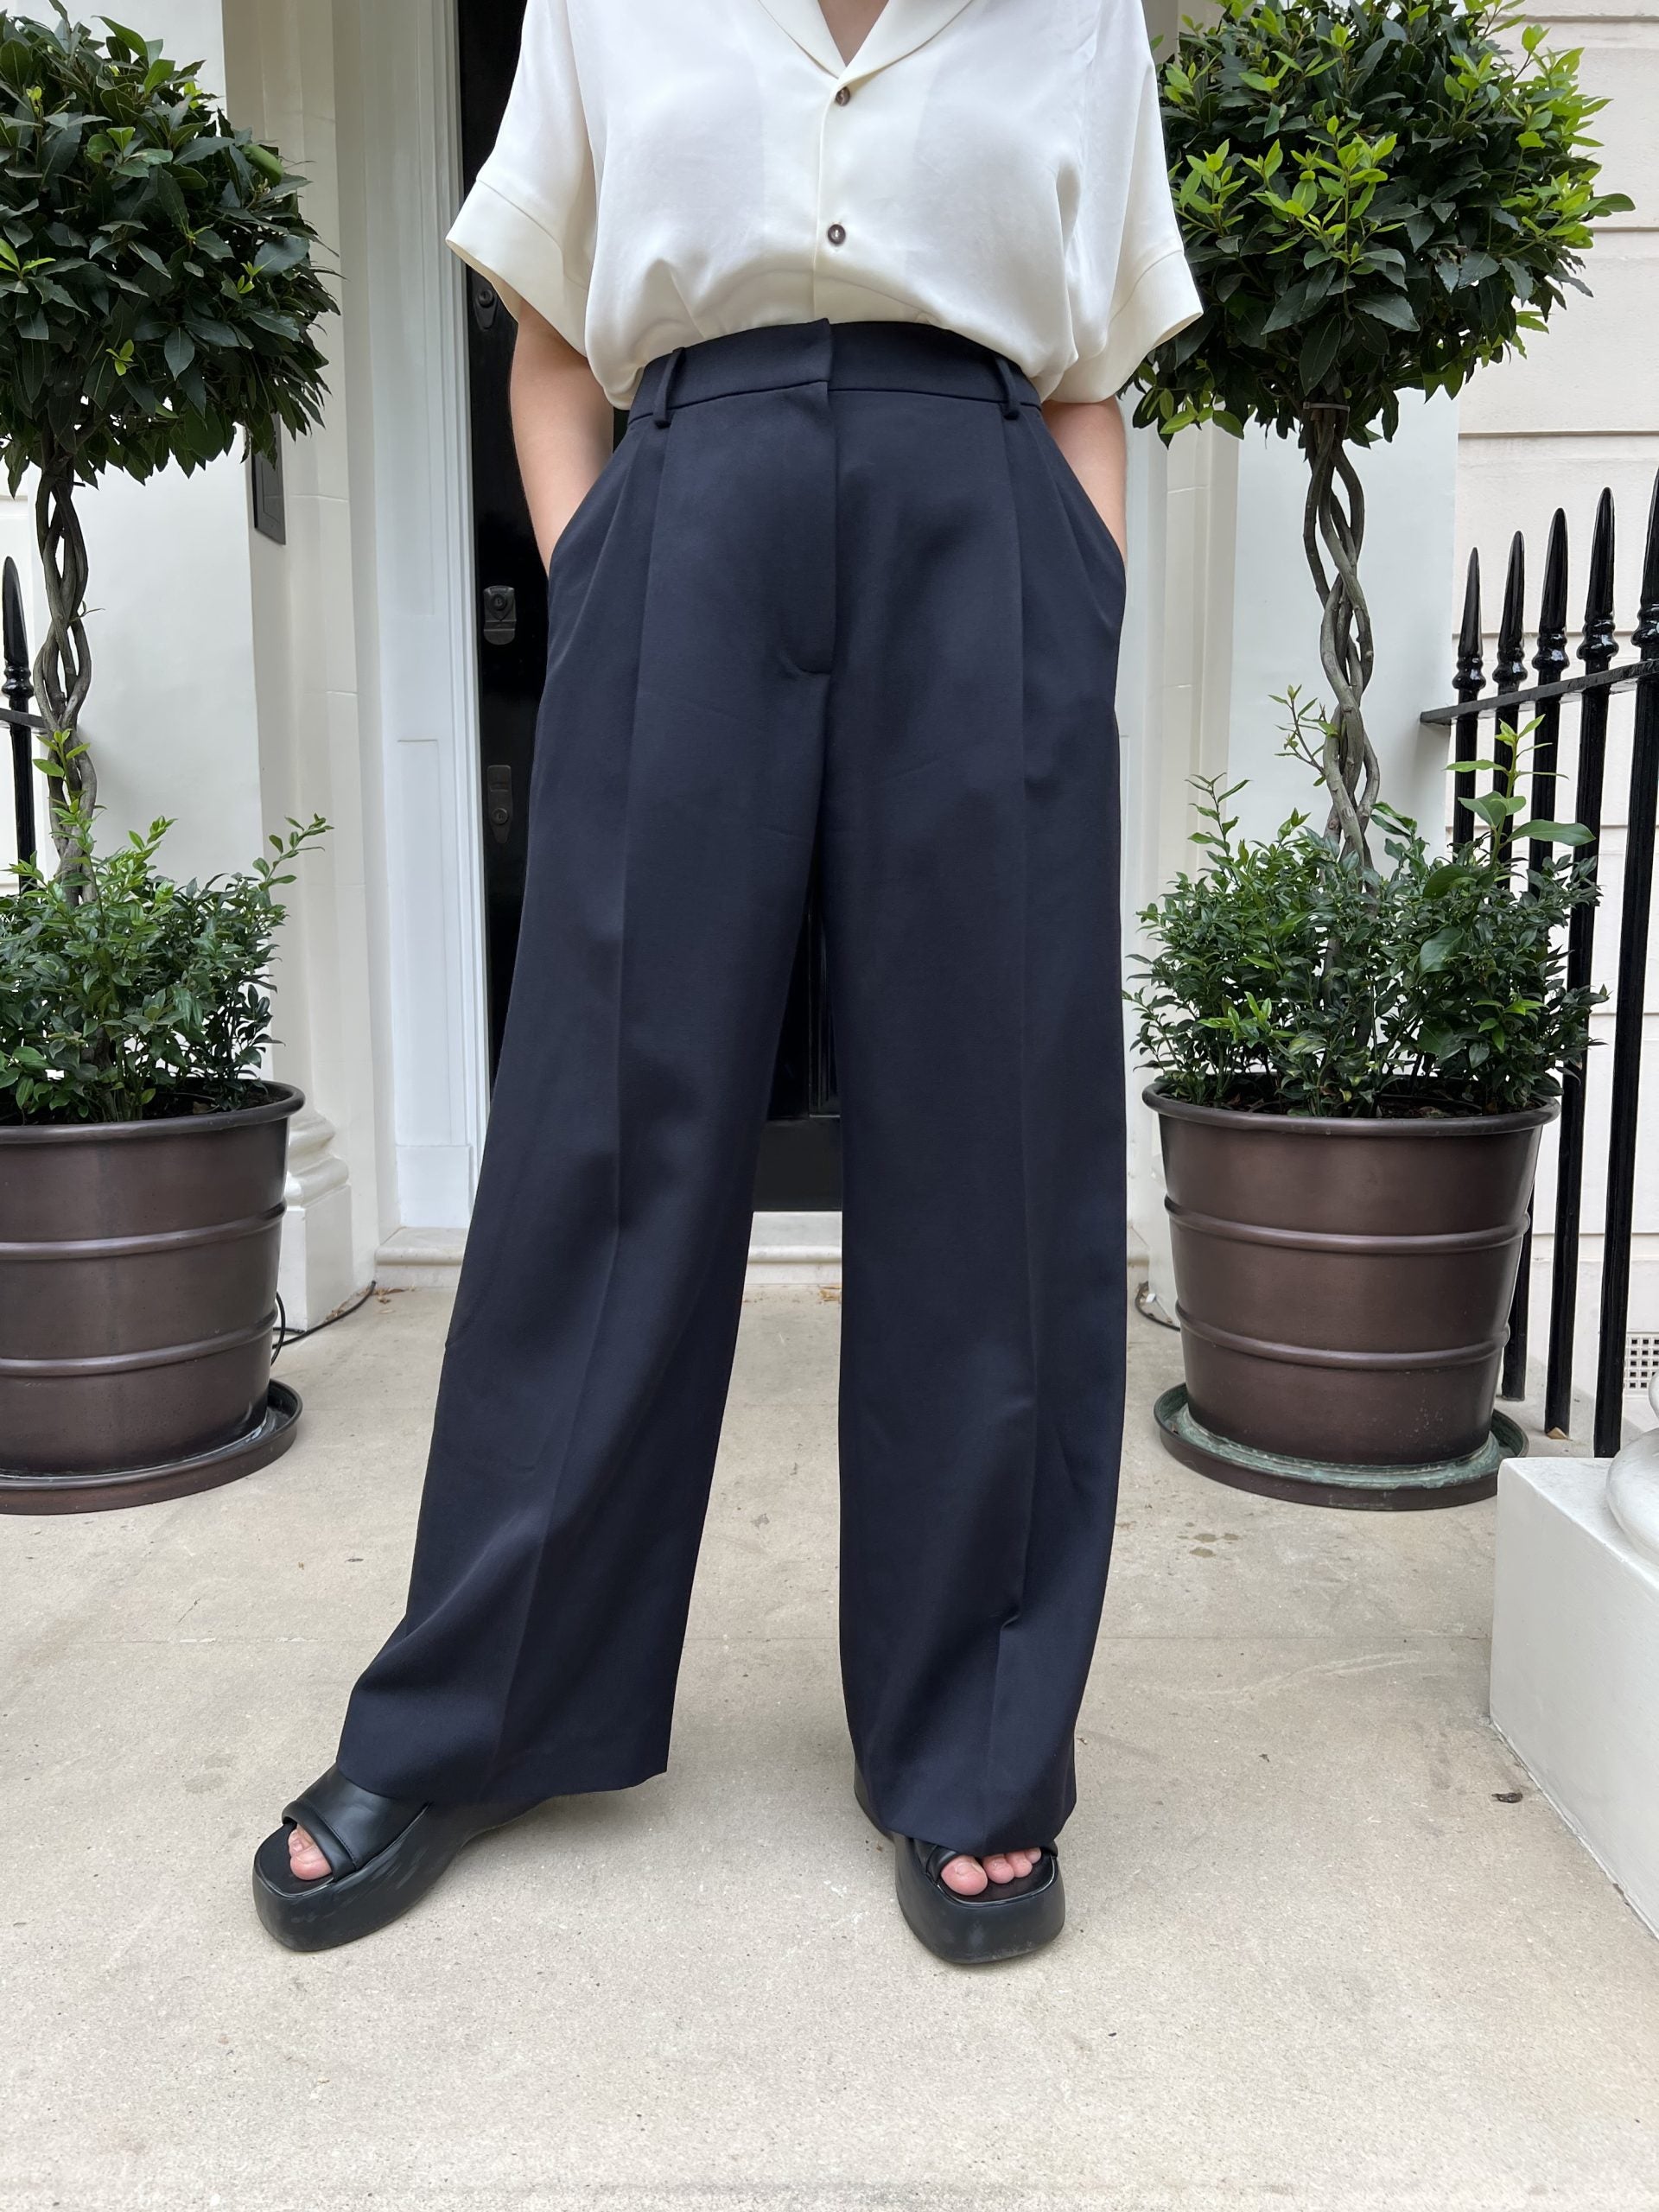 Women wearing the Billy Trousers sewing pattern from Bella Loves Patterns on The Fold Line. A trouser pattern made in wool suitings, wool crepes, wool mohair, wool viscose blends, gabardine or flannel fabrics, featuring a wide-leg, full length, pressed fr